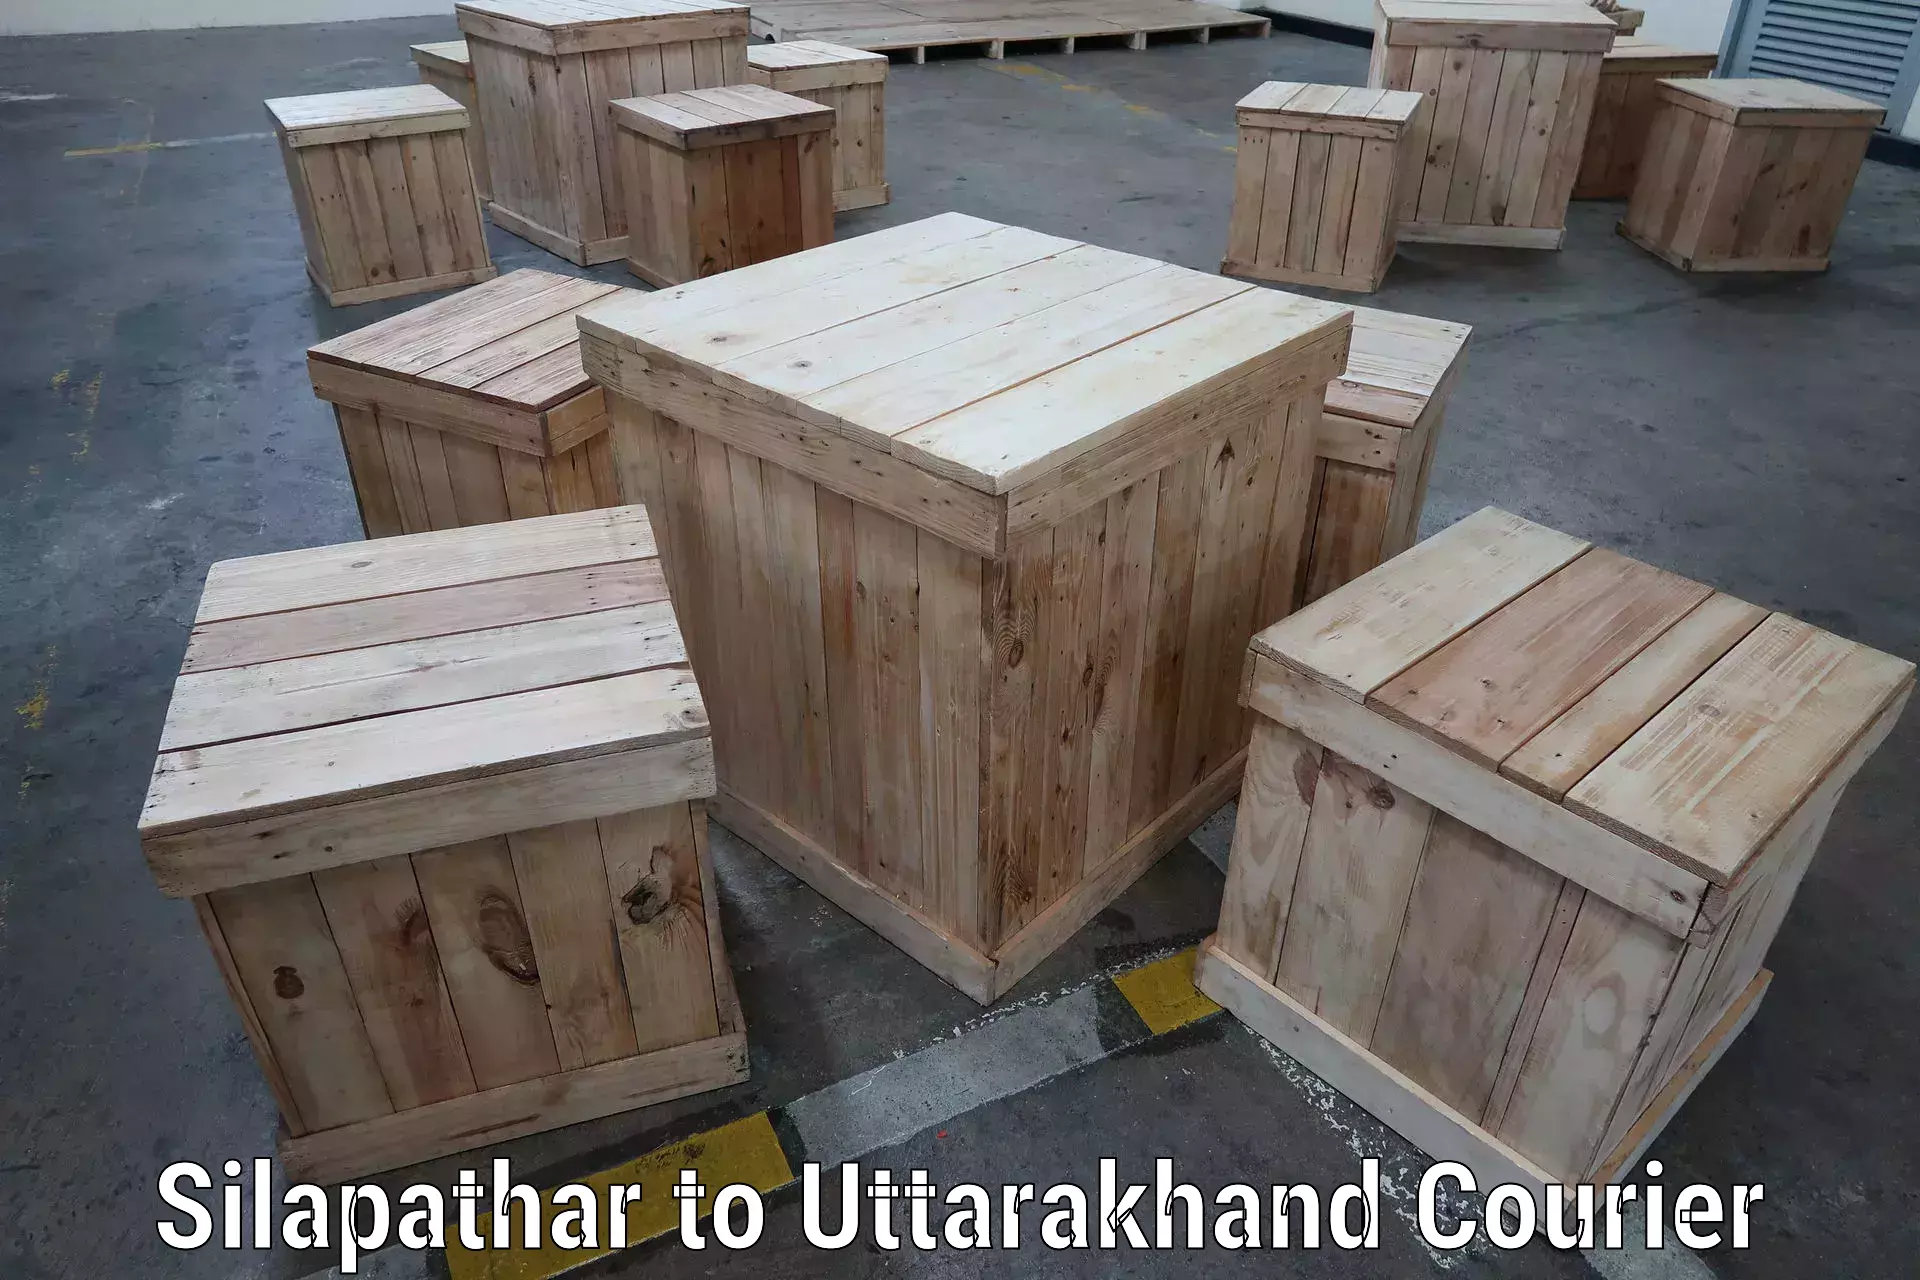 Multi-national courier services Silapathar to Uttarakhand